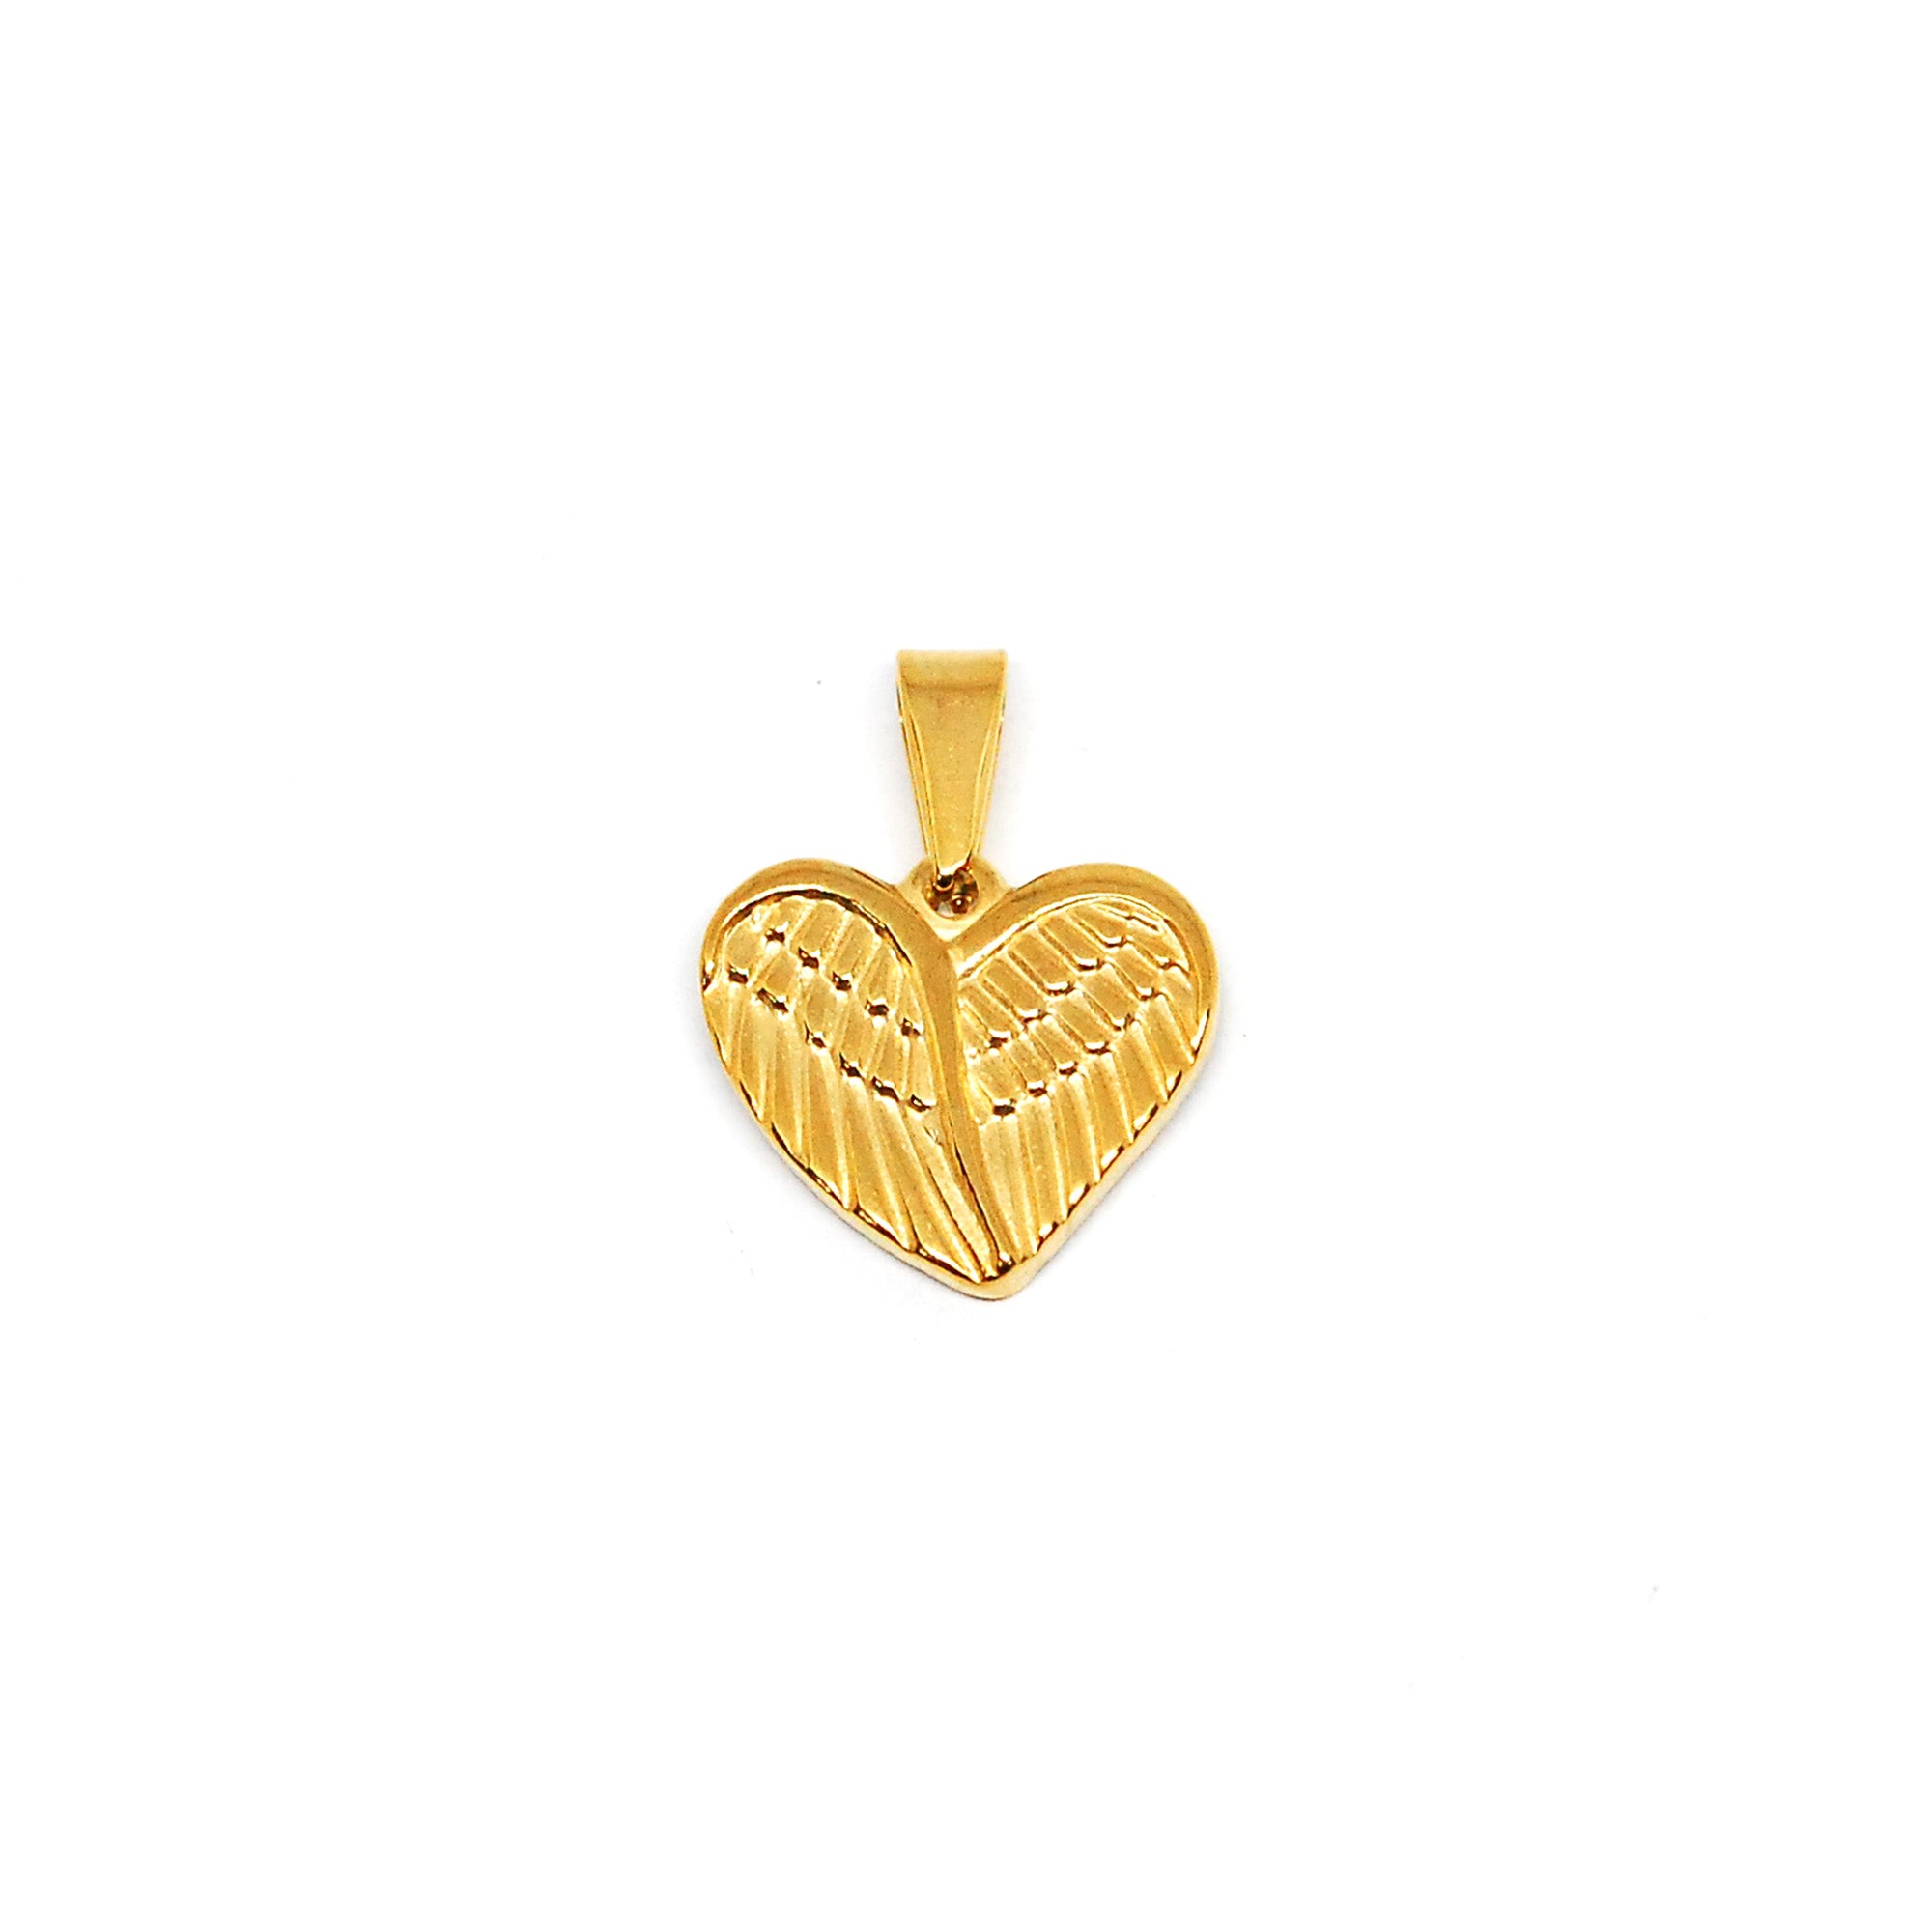 ESP 5412: Gold Plated Double-Sided Winged Heart Pendant